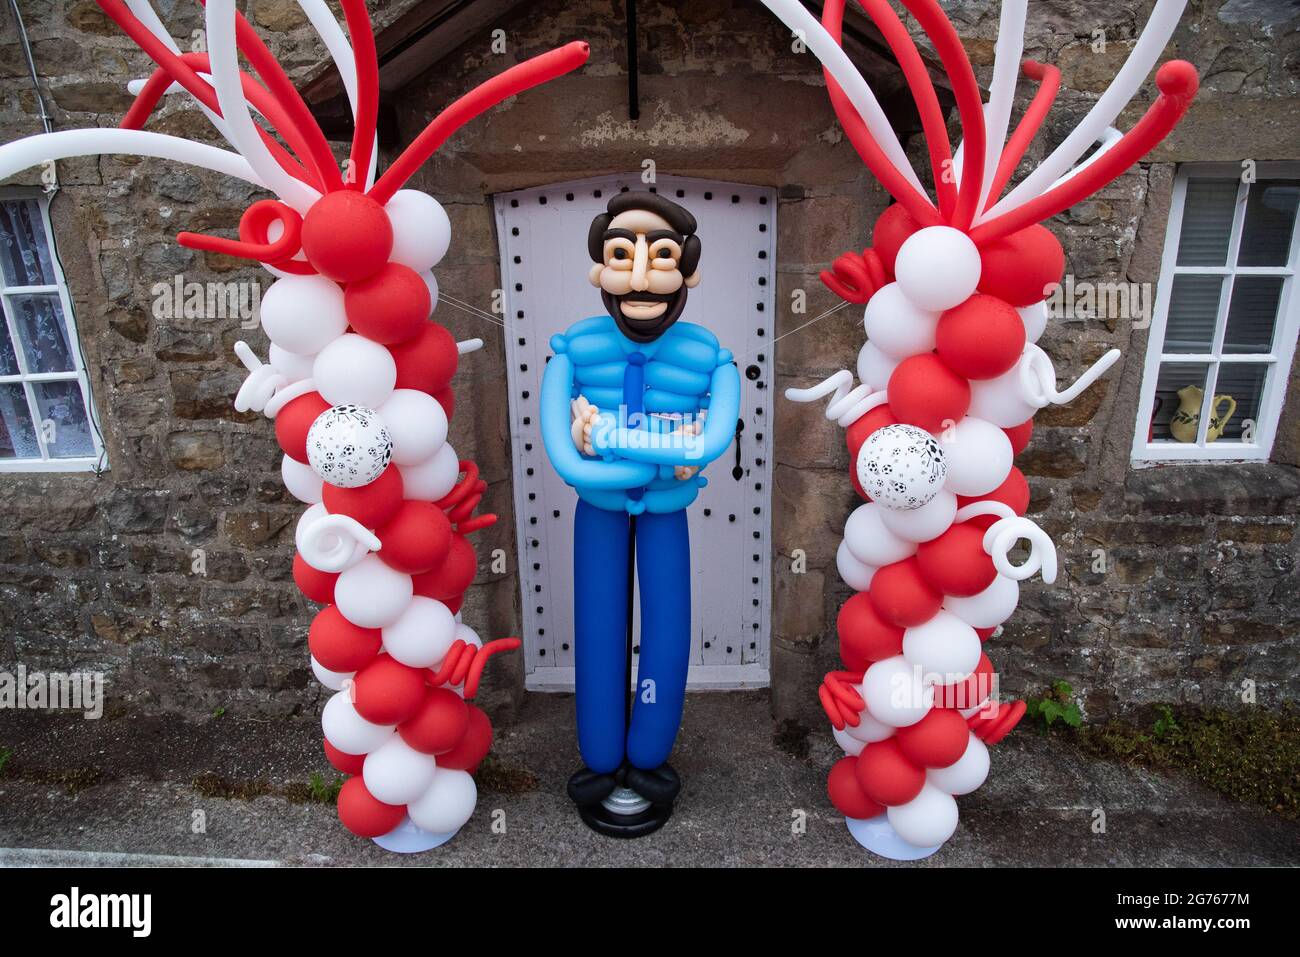 Preston, Lancashire, UK. 11th July, 2021. A life-size balloon Gareth Southgate in the village of Chipping, Preston, Lancashire, UK before kick-off in the UEFA Euro 2020 football final between England and Italy. Credit: John Eveson/Alamy Live News Stock Photo